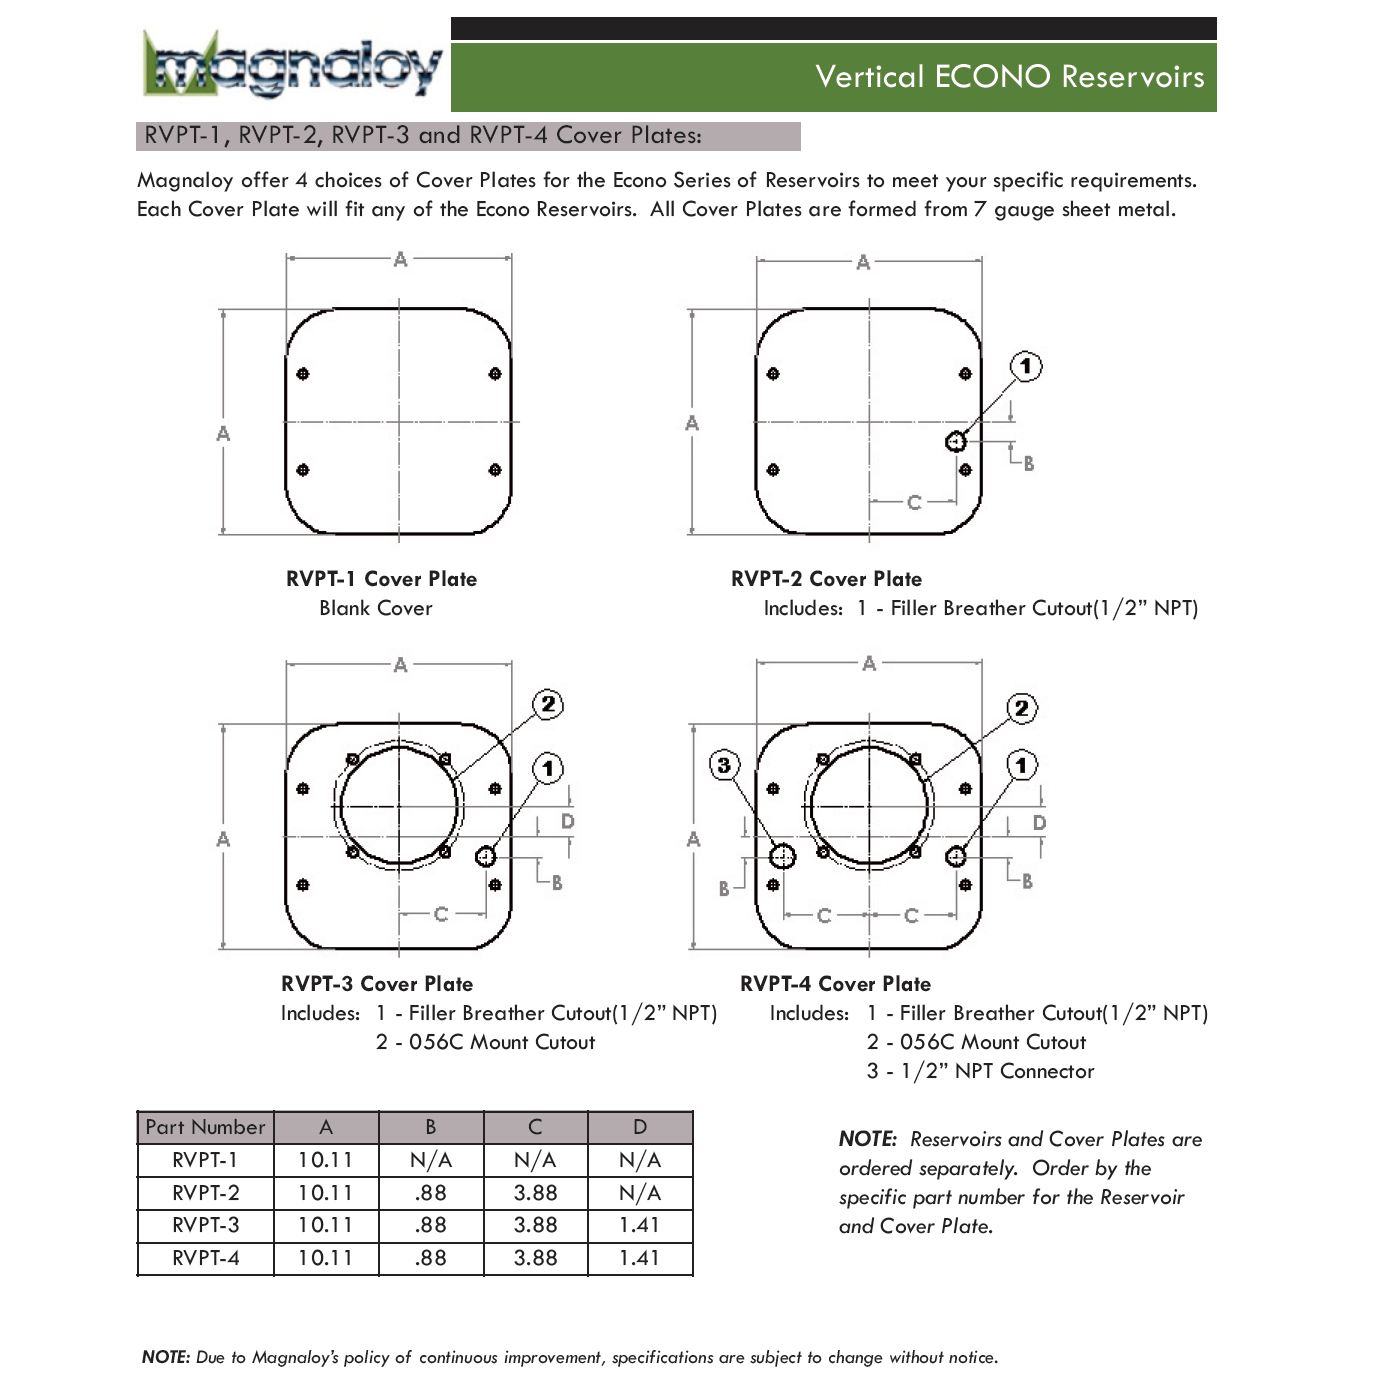 RVPT-1 : Magnaloy Reservoir Lid Cover Plate, Vertical Econo Series, 7GA, Blank Cover with Mounting Holes